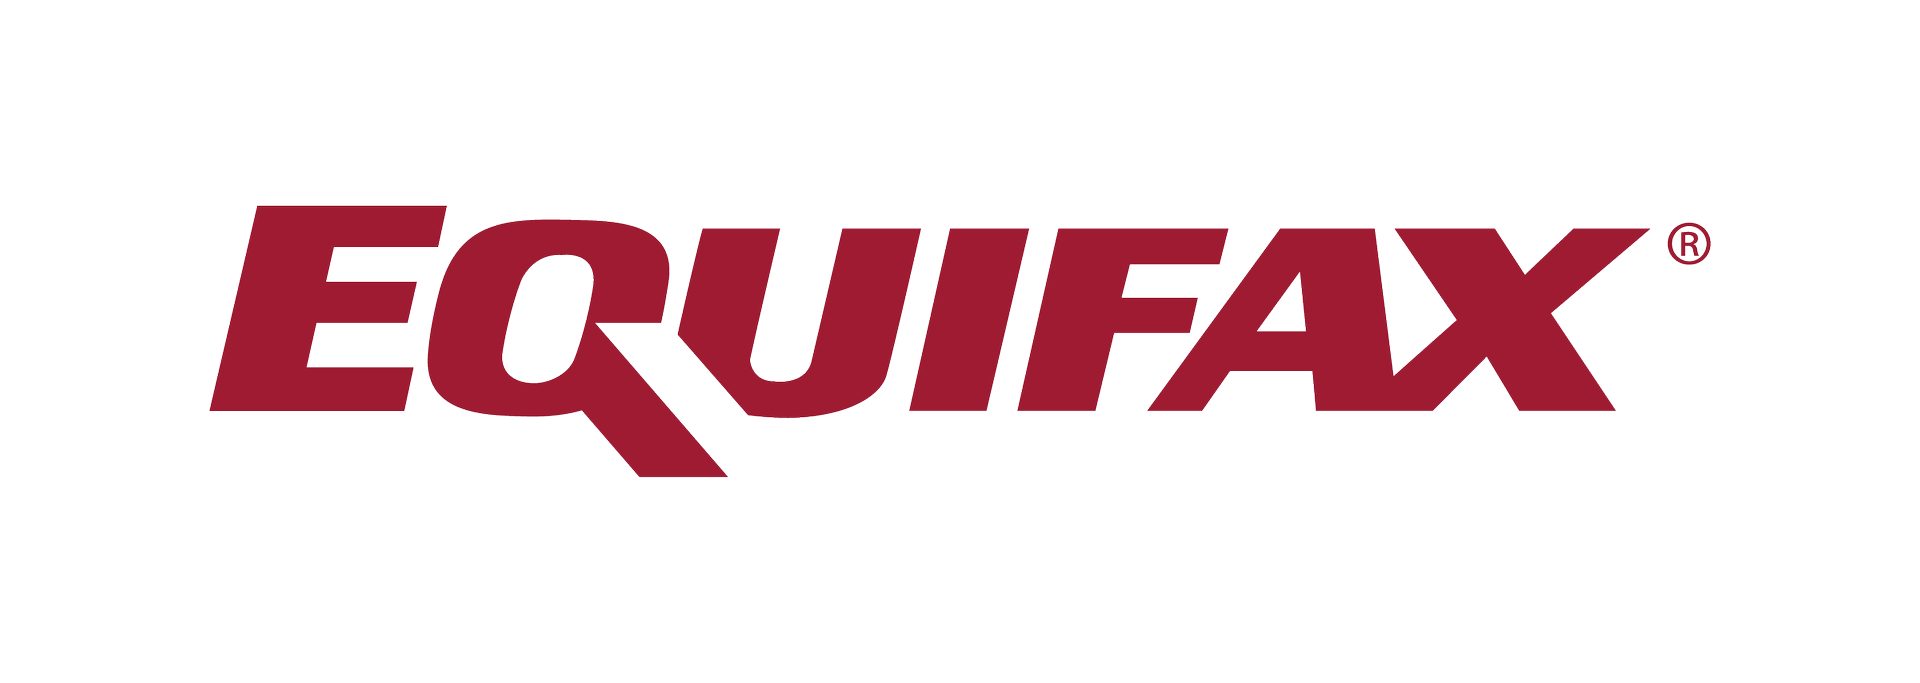 Equifax data breach payments began with prepaid cards